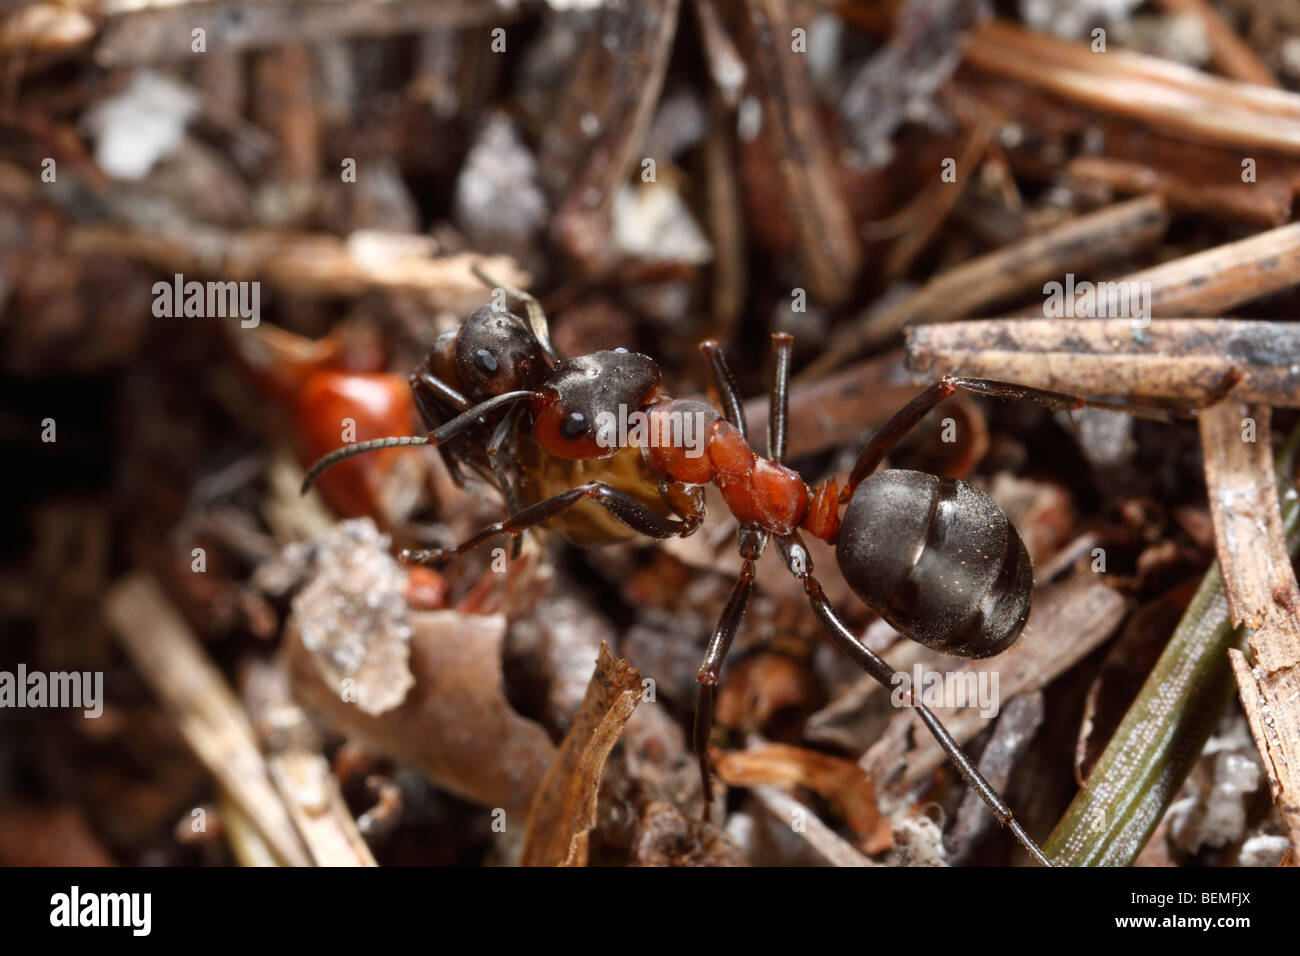 An ant of the Formica rufa-Formica polyctena group on pine needles. It is carrying a dead sibling out of the nest. Stock Photo